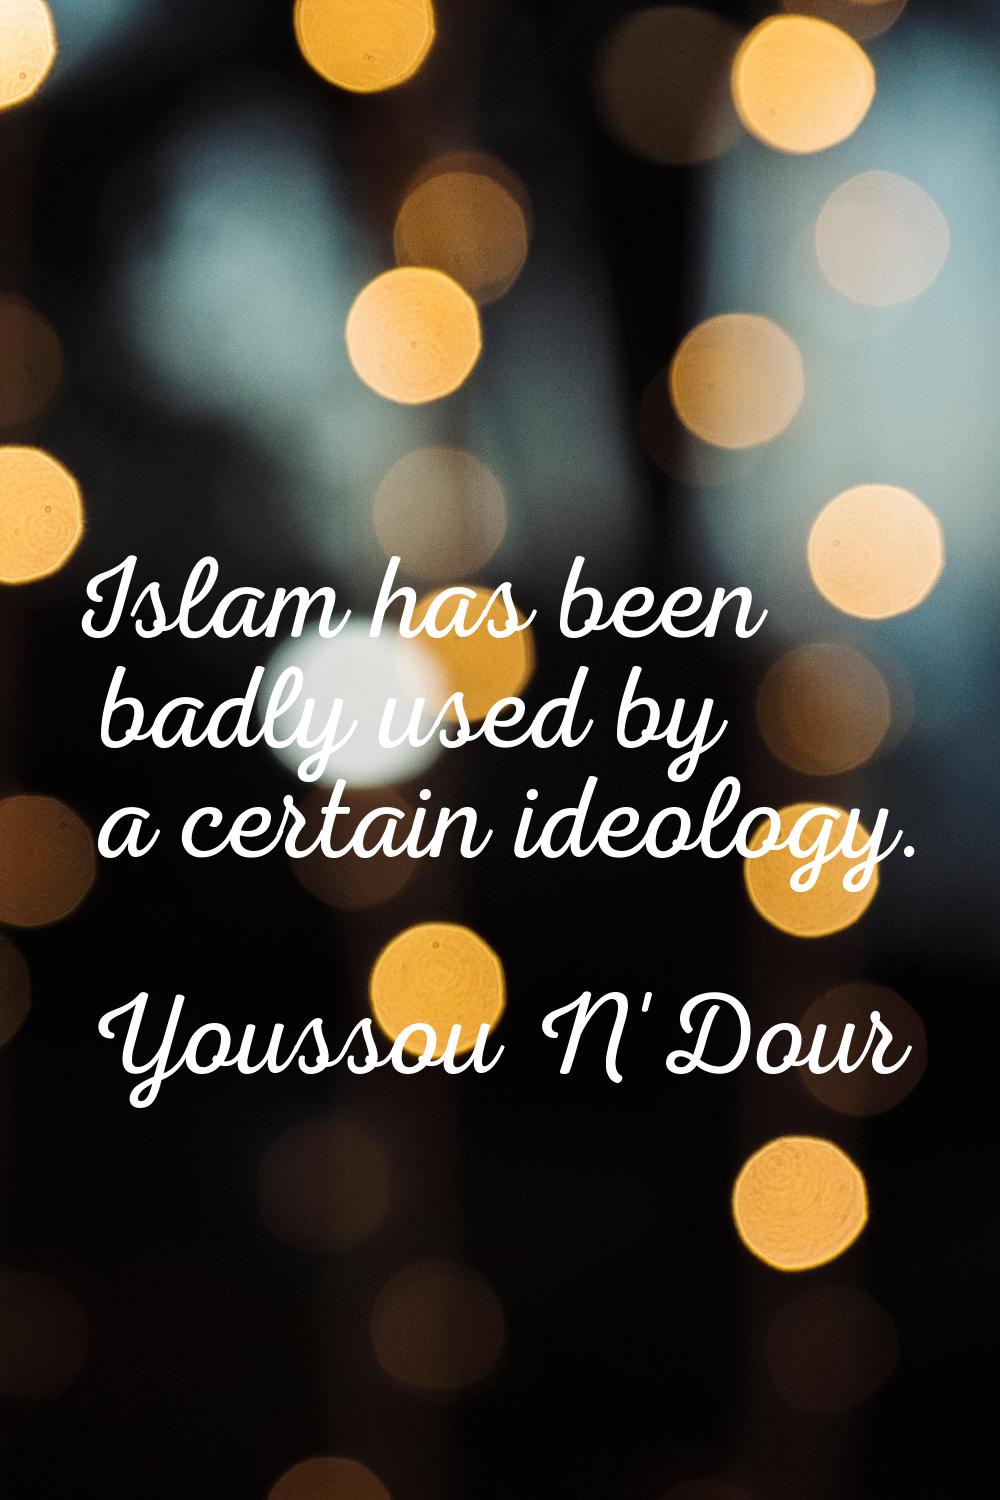 Islam has been badly used by a certain ideology.